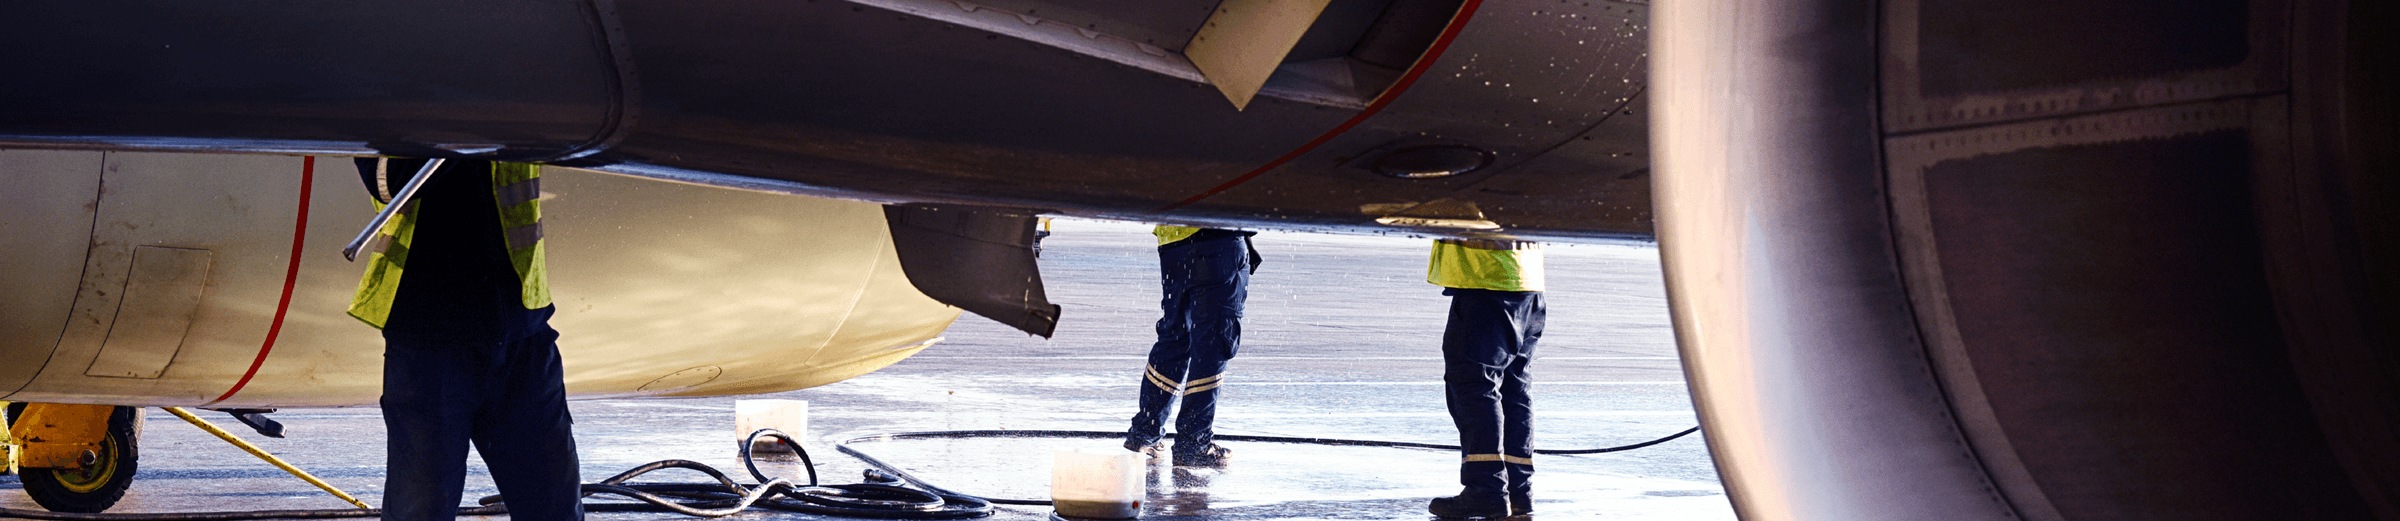 Two workers in high visibility vests are conducting maintenance on the underside of a large airplane, focusing on its engines and landing gear. Maintenance equipment is visible on the wet ground, indicating active work. The scene is dimly lit with some natural light.